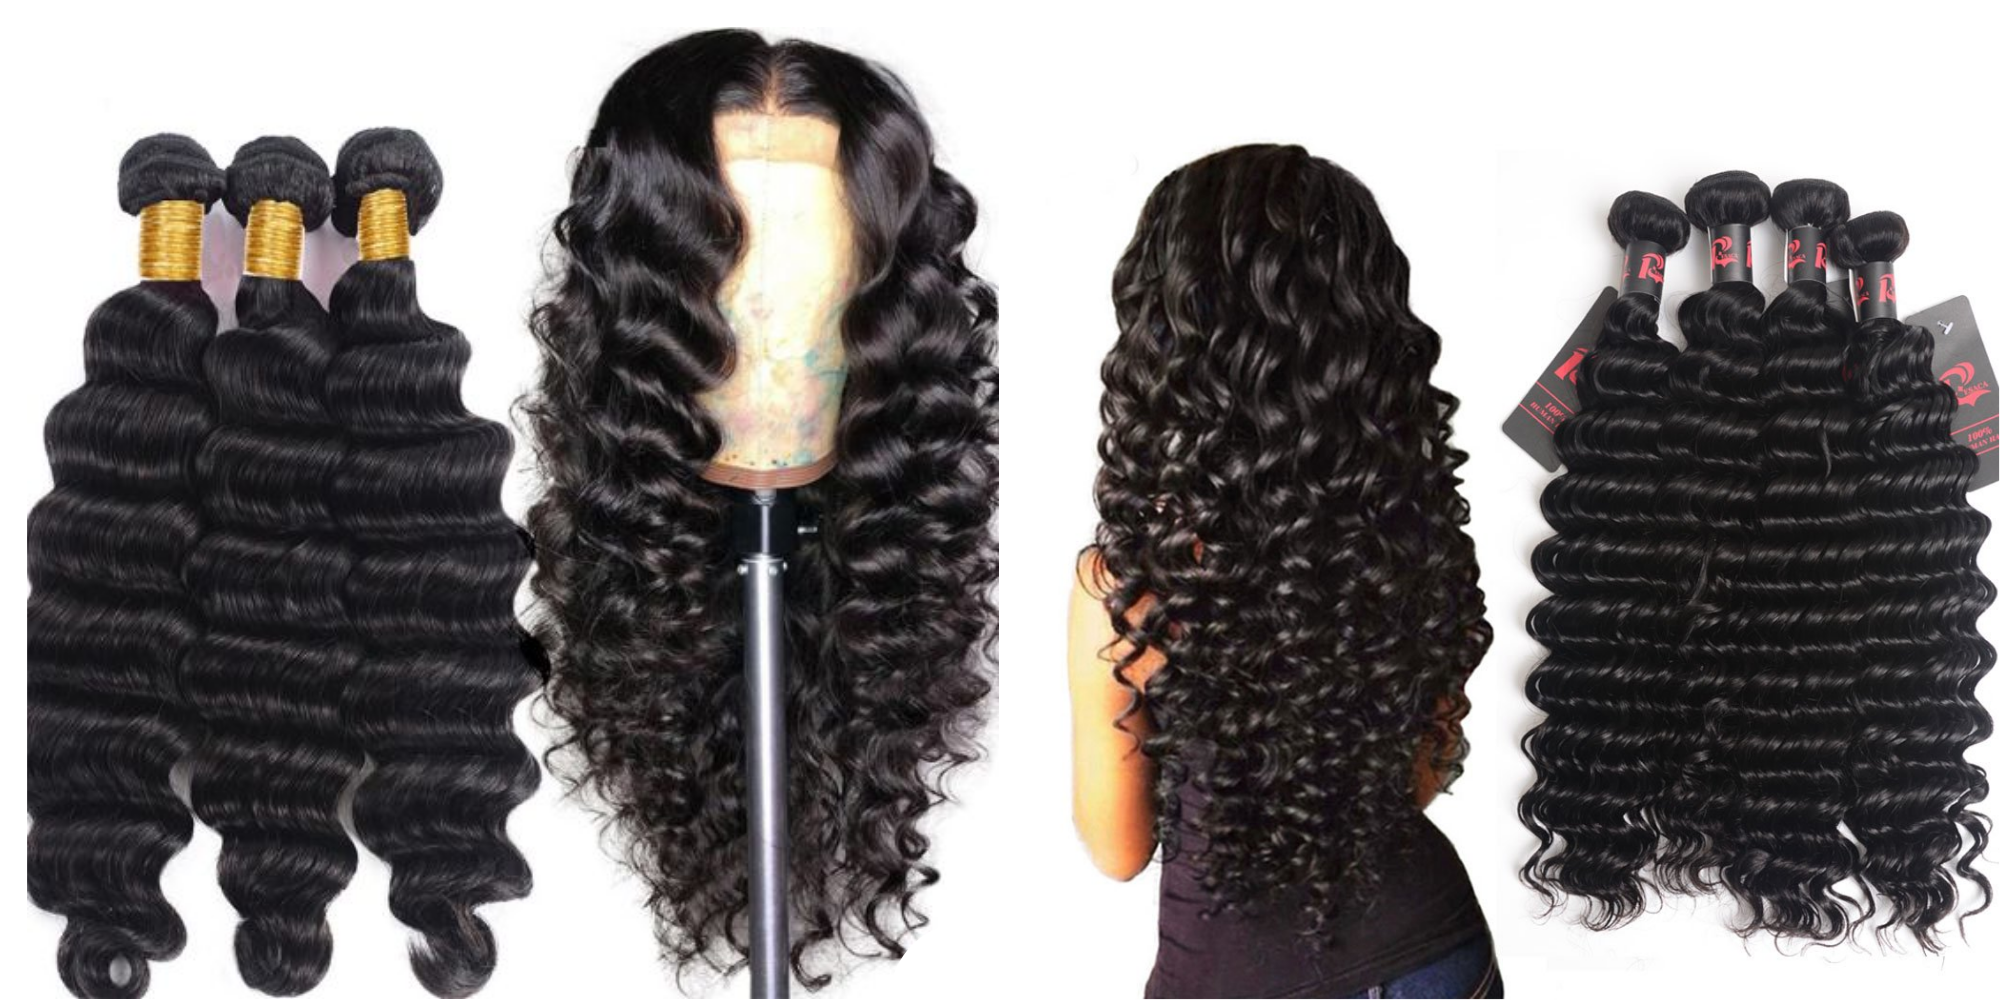 Human hair Bundles: 4 Useful Tips That Will Make Your Life Easier